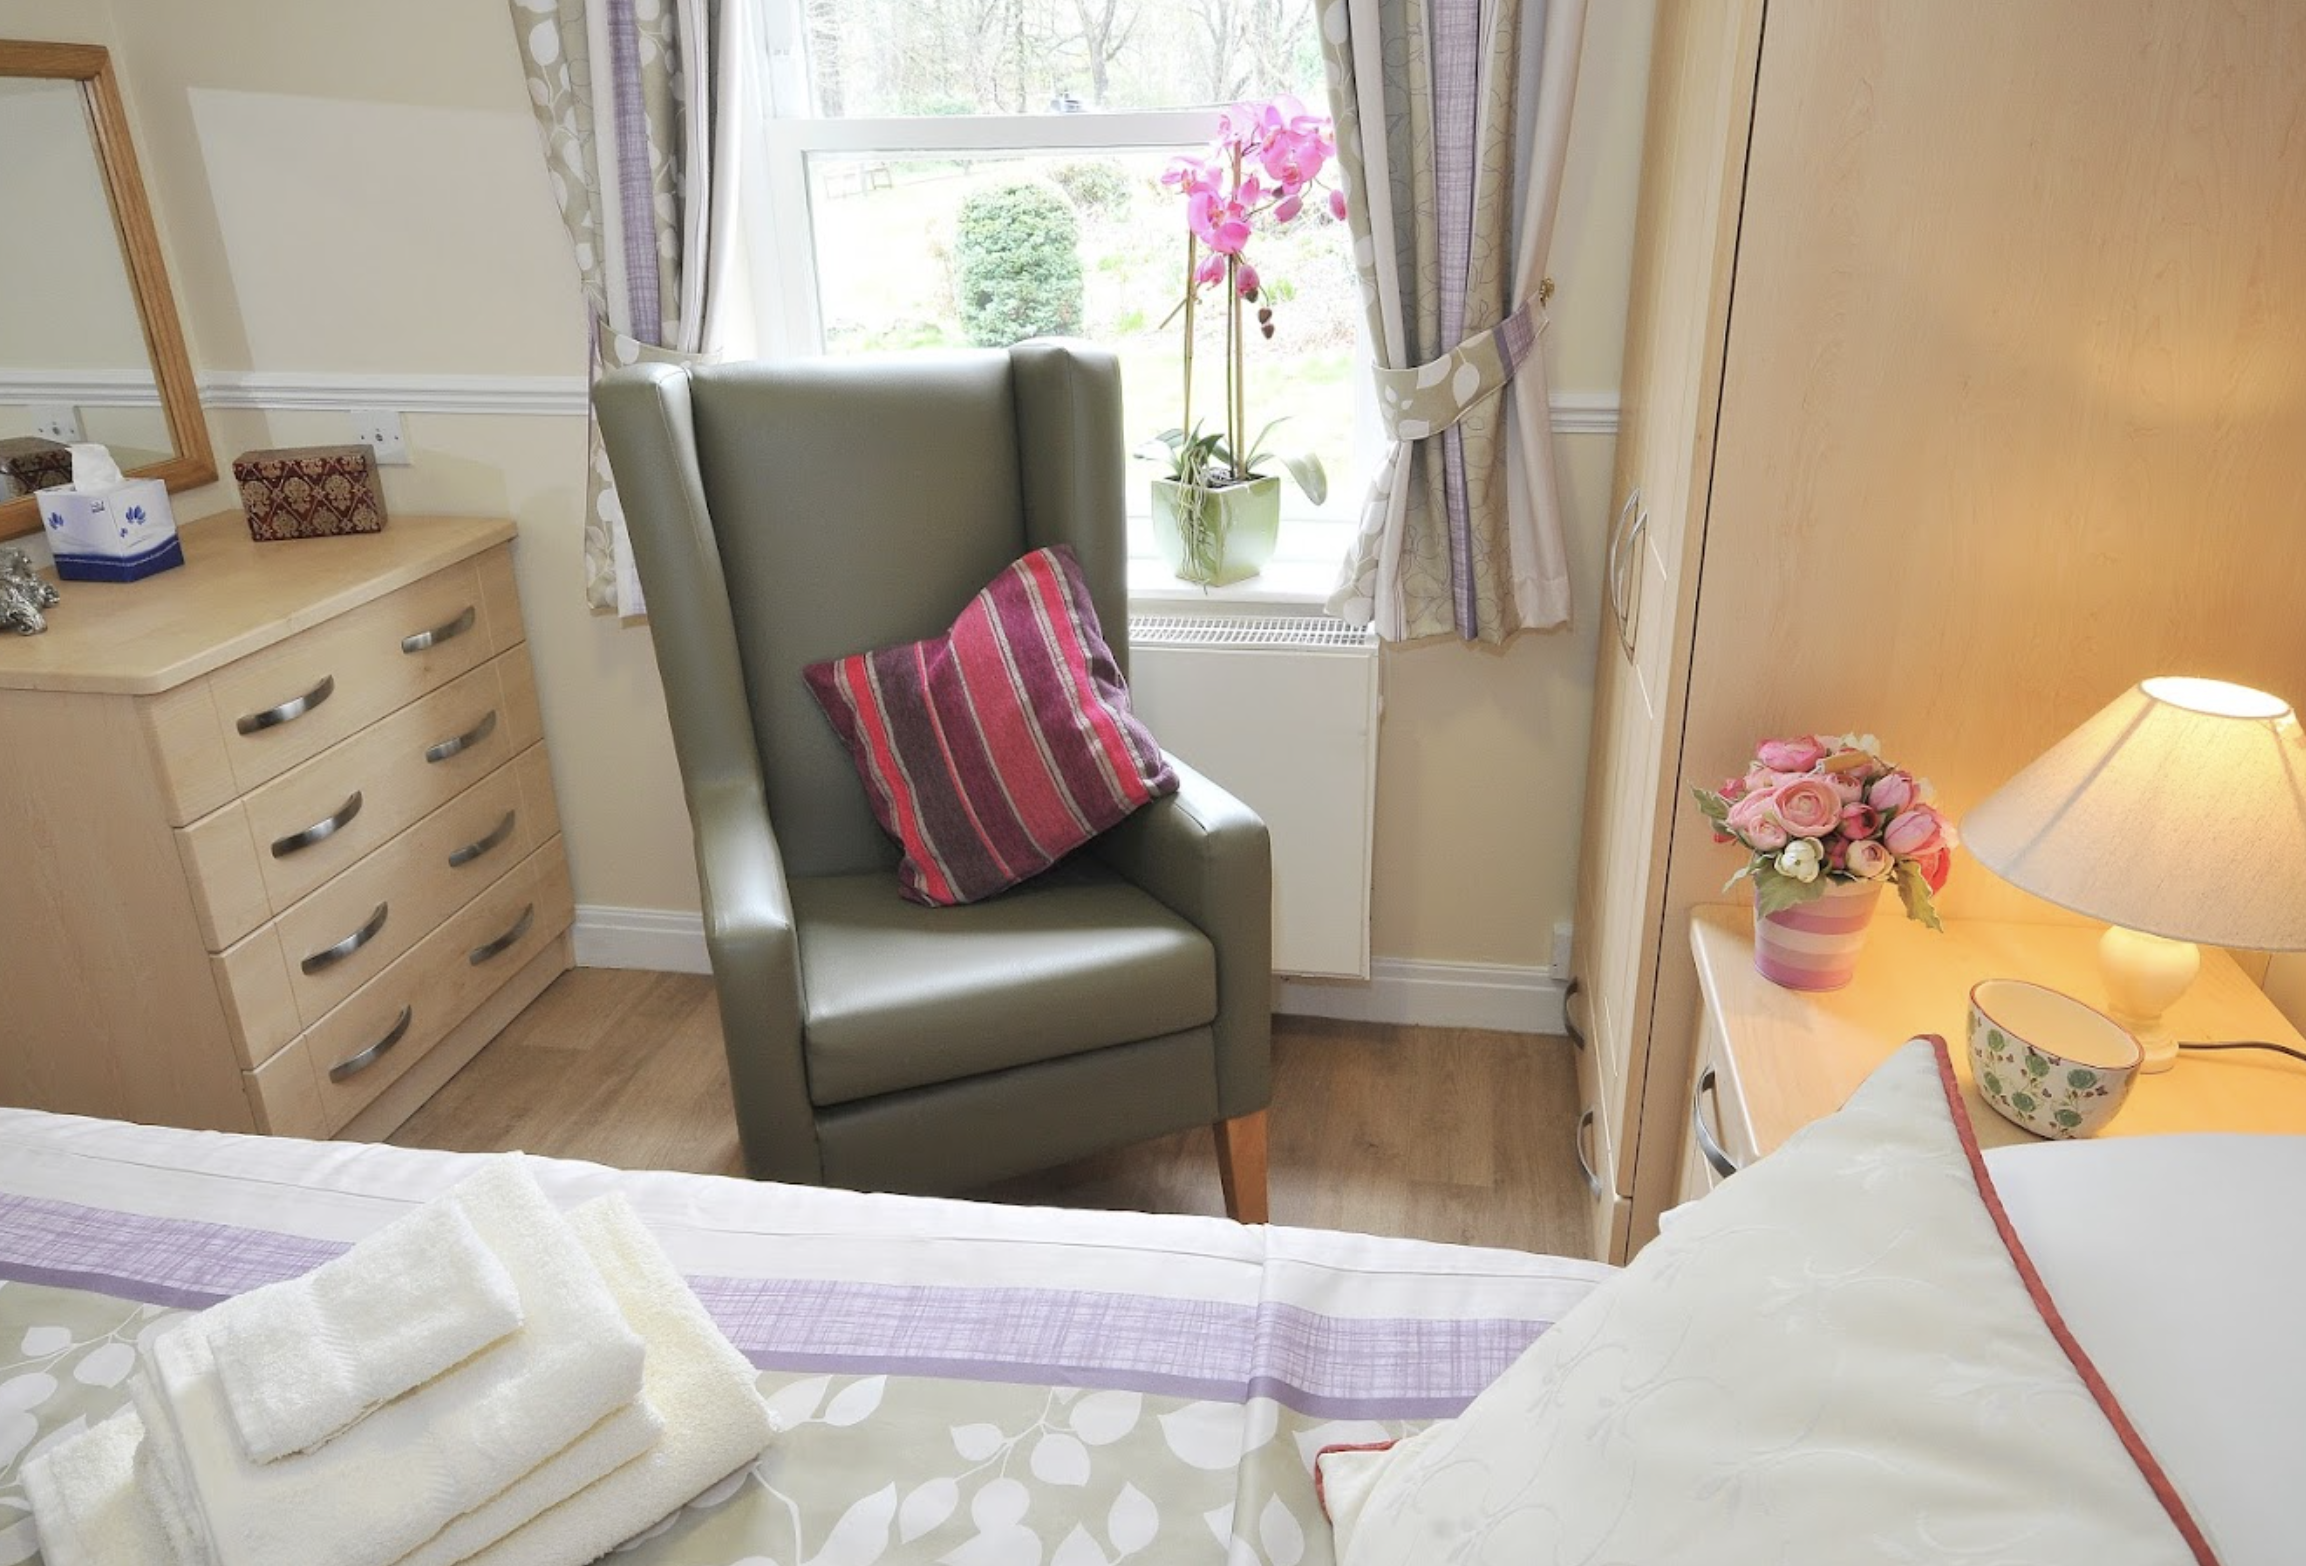 Bedroom of Cleveland House care home in Huddersfield, West Yorkshire